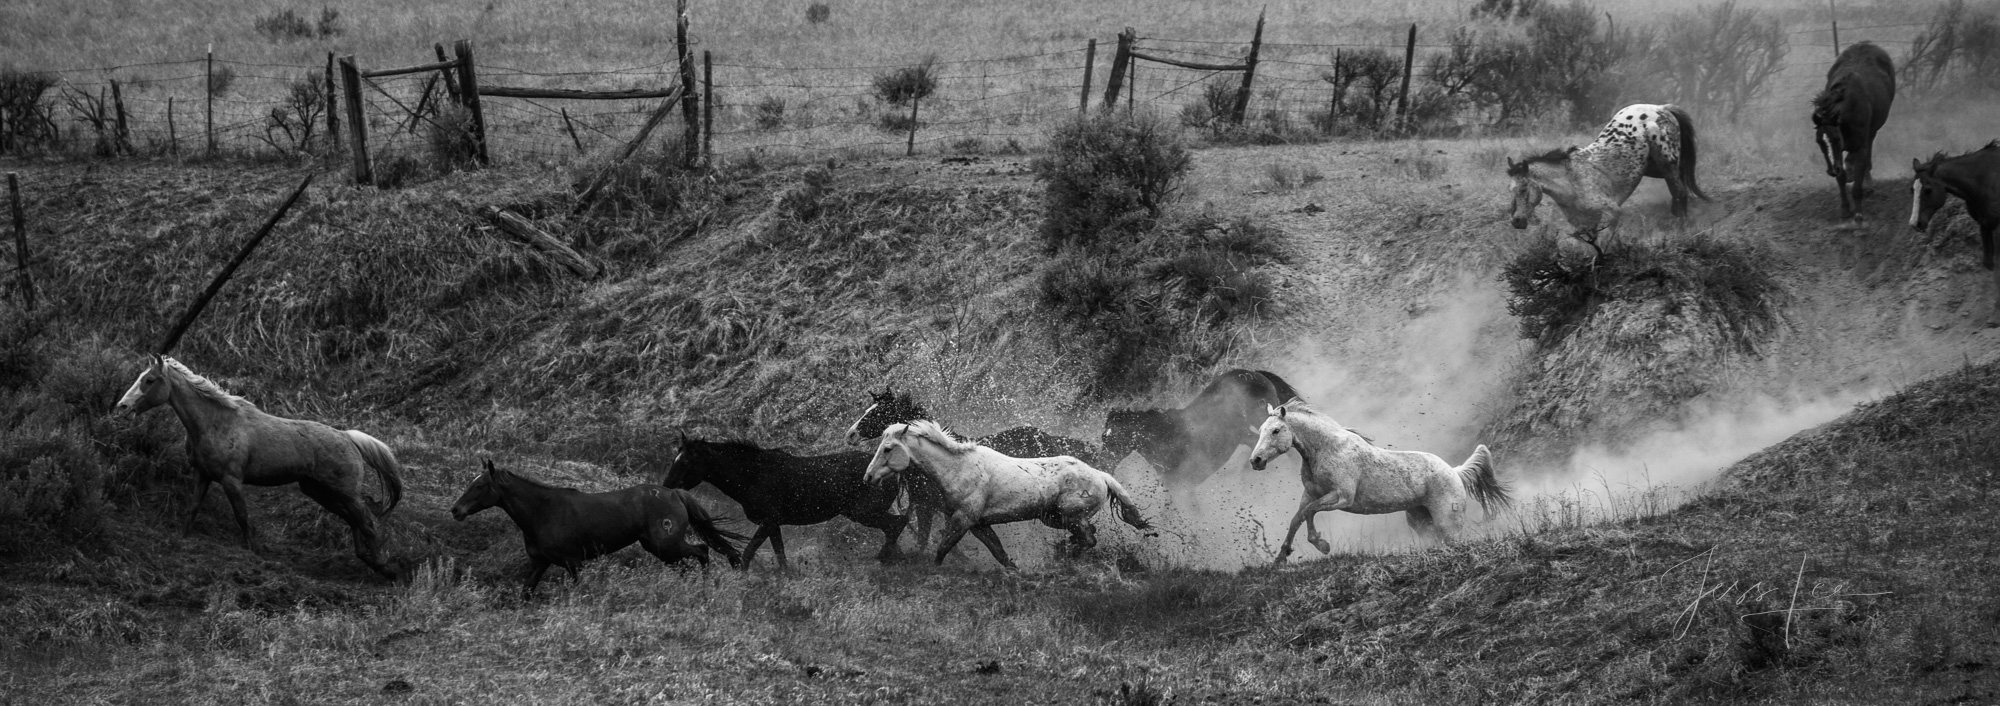 Fine Art Limited Edition Photo Prints of Cowboys, Horses, and life in the West. Over Hill, Over Dale. A Cowboy picture in black...